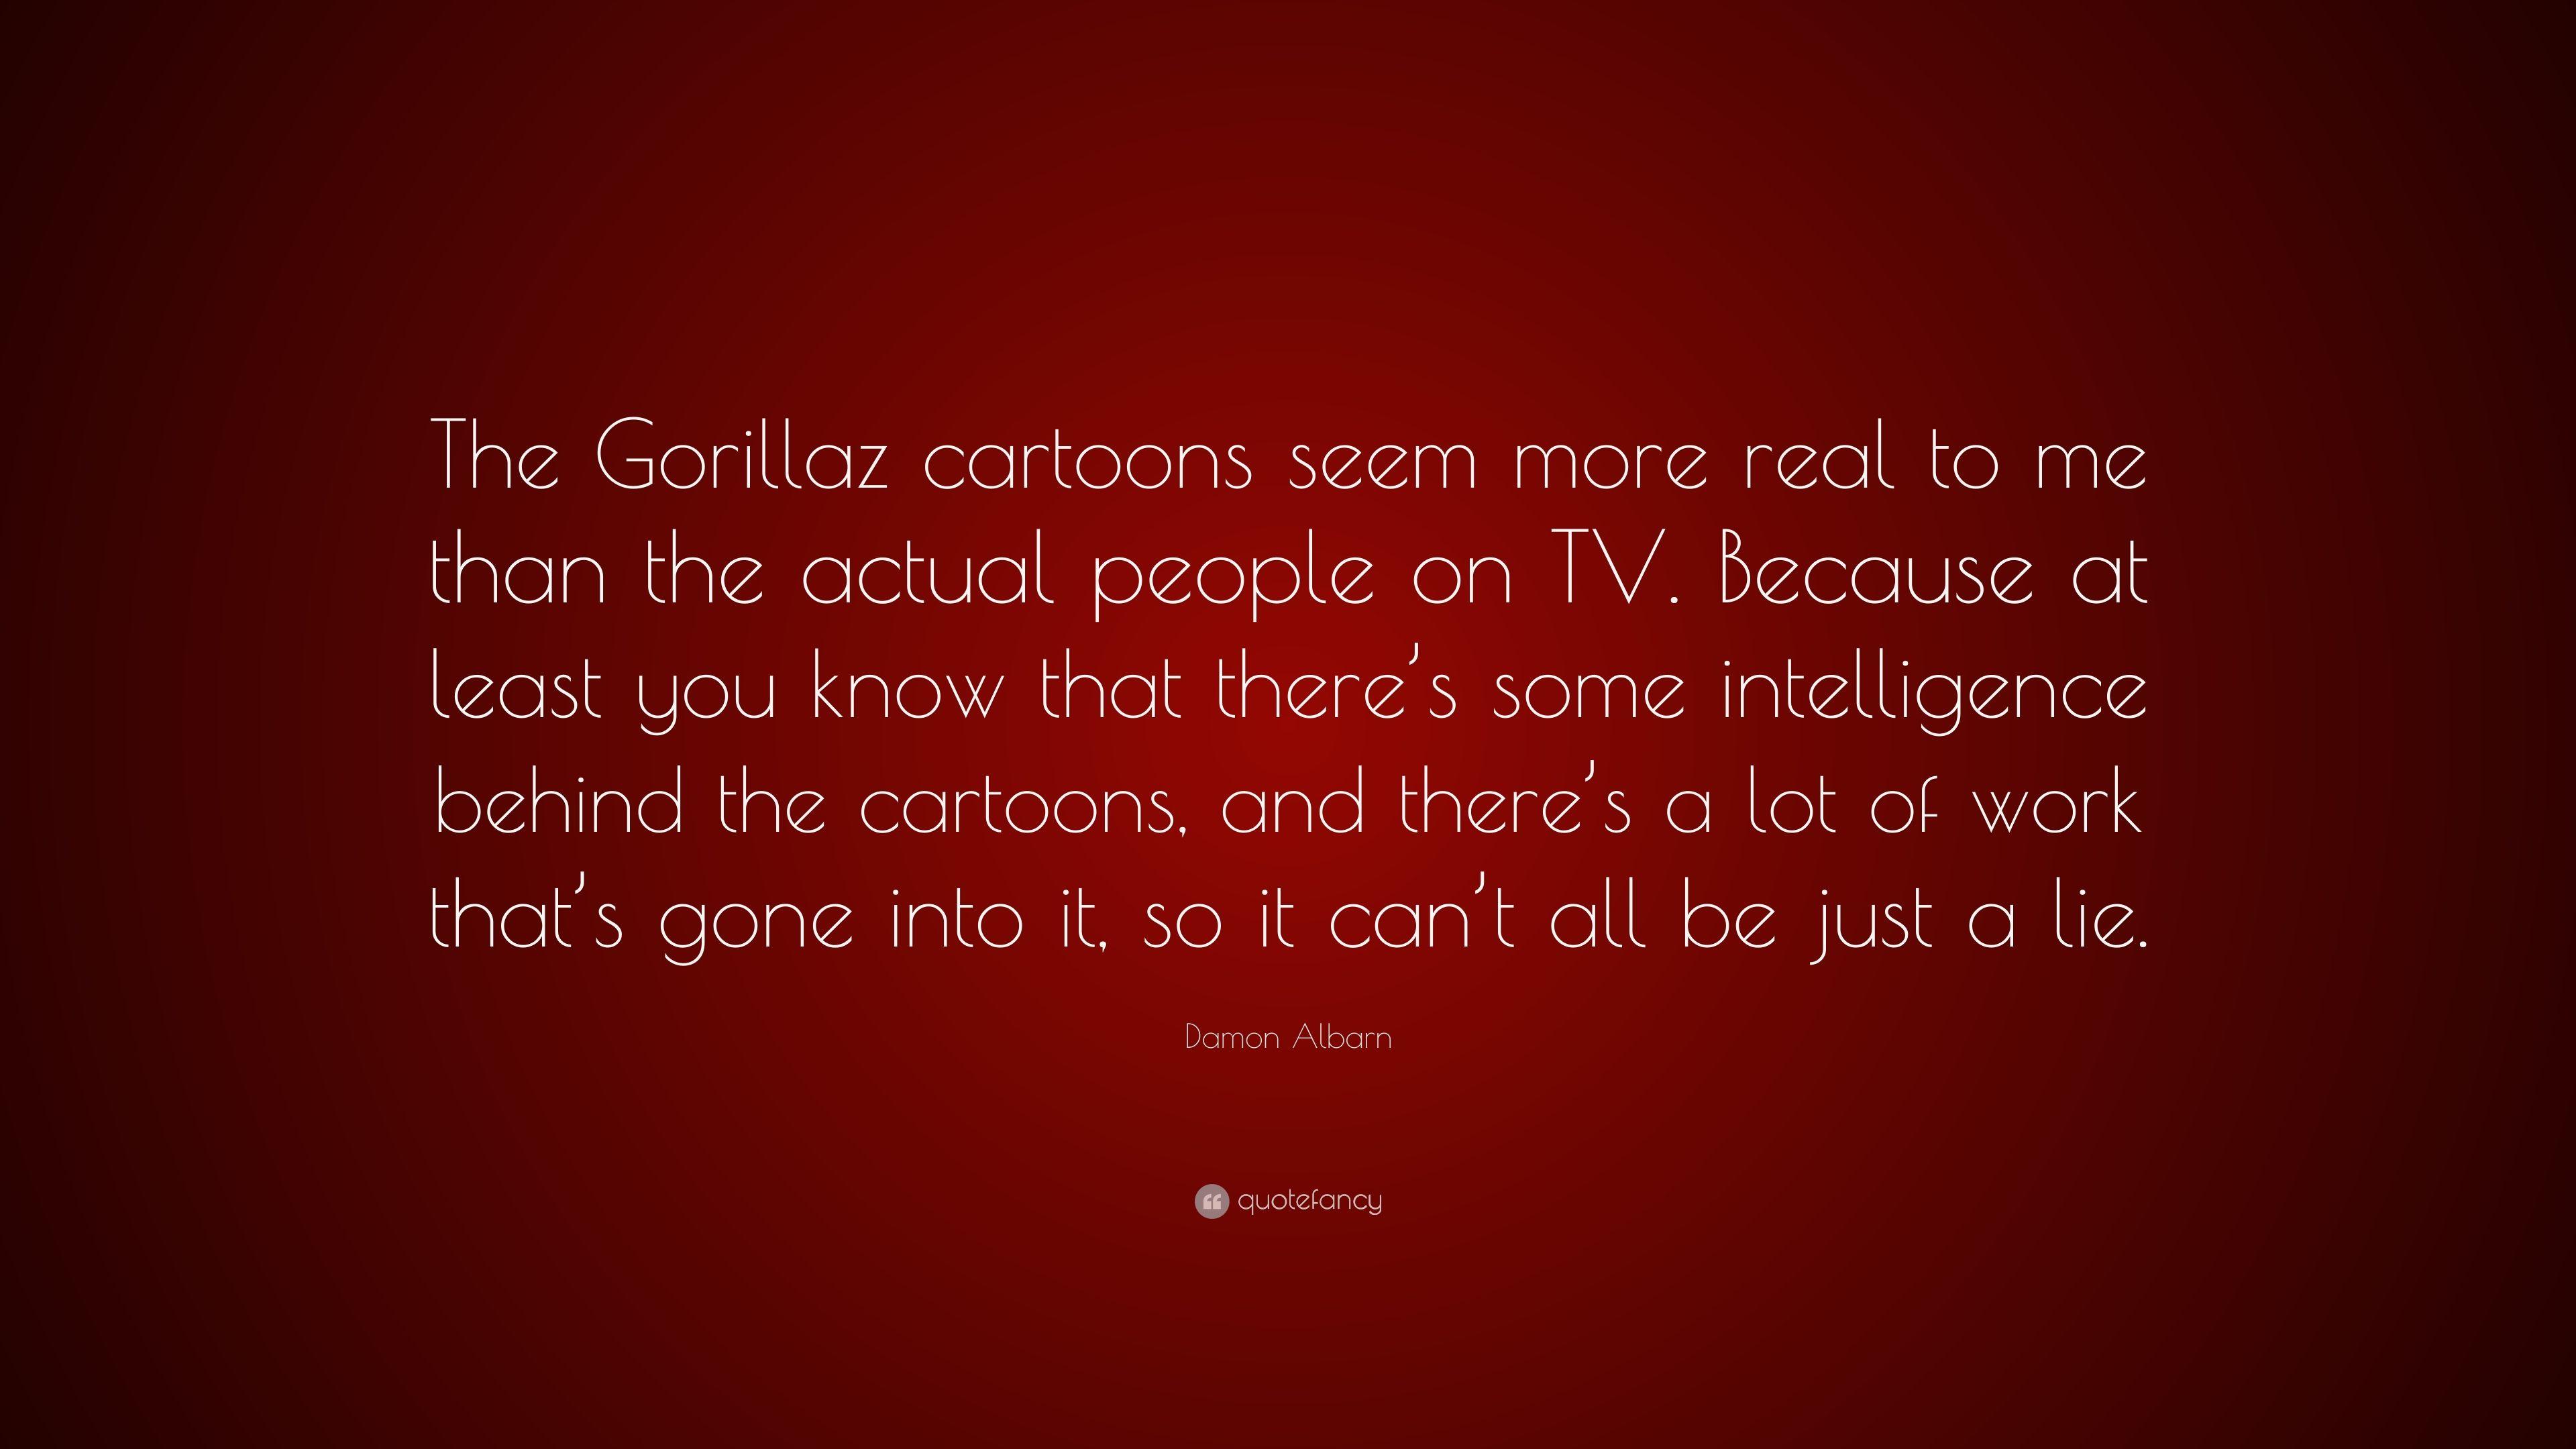 Damon Albarn Quote: “The Gorillaz cartoons seem more real to me than